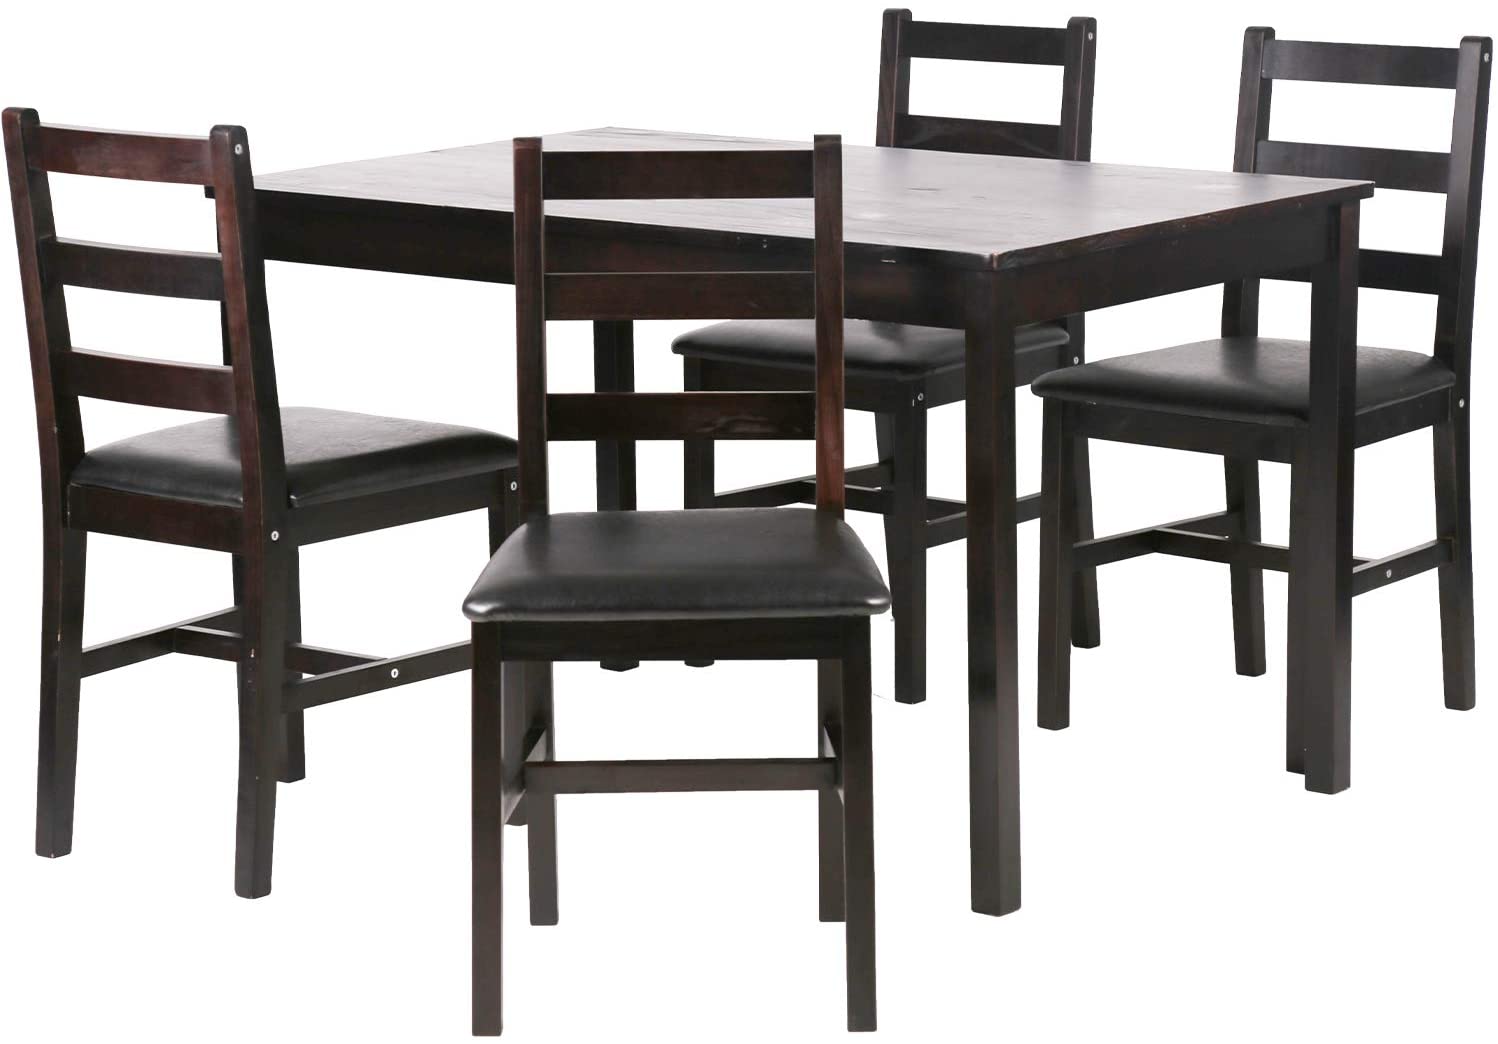 Dining Table Set Kitchen Dining Table Set Wood Table and Chairs Set Kitchen Table and Chairs for 4 Person